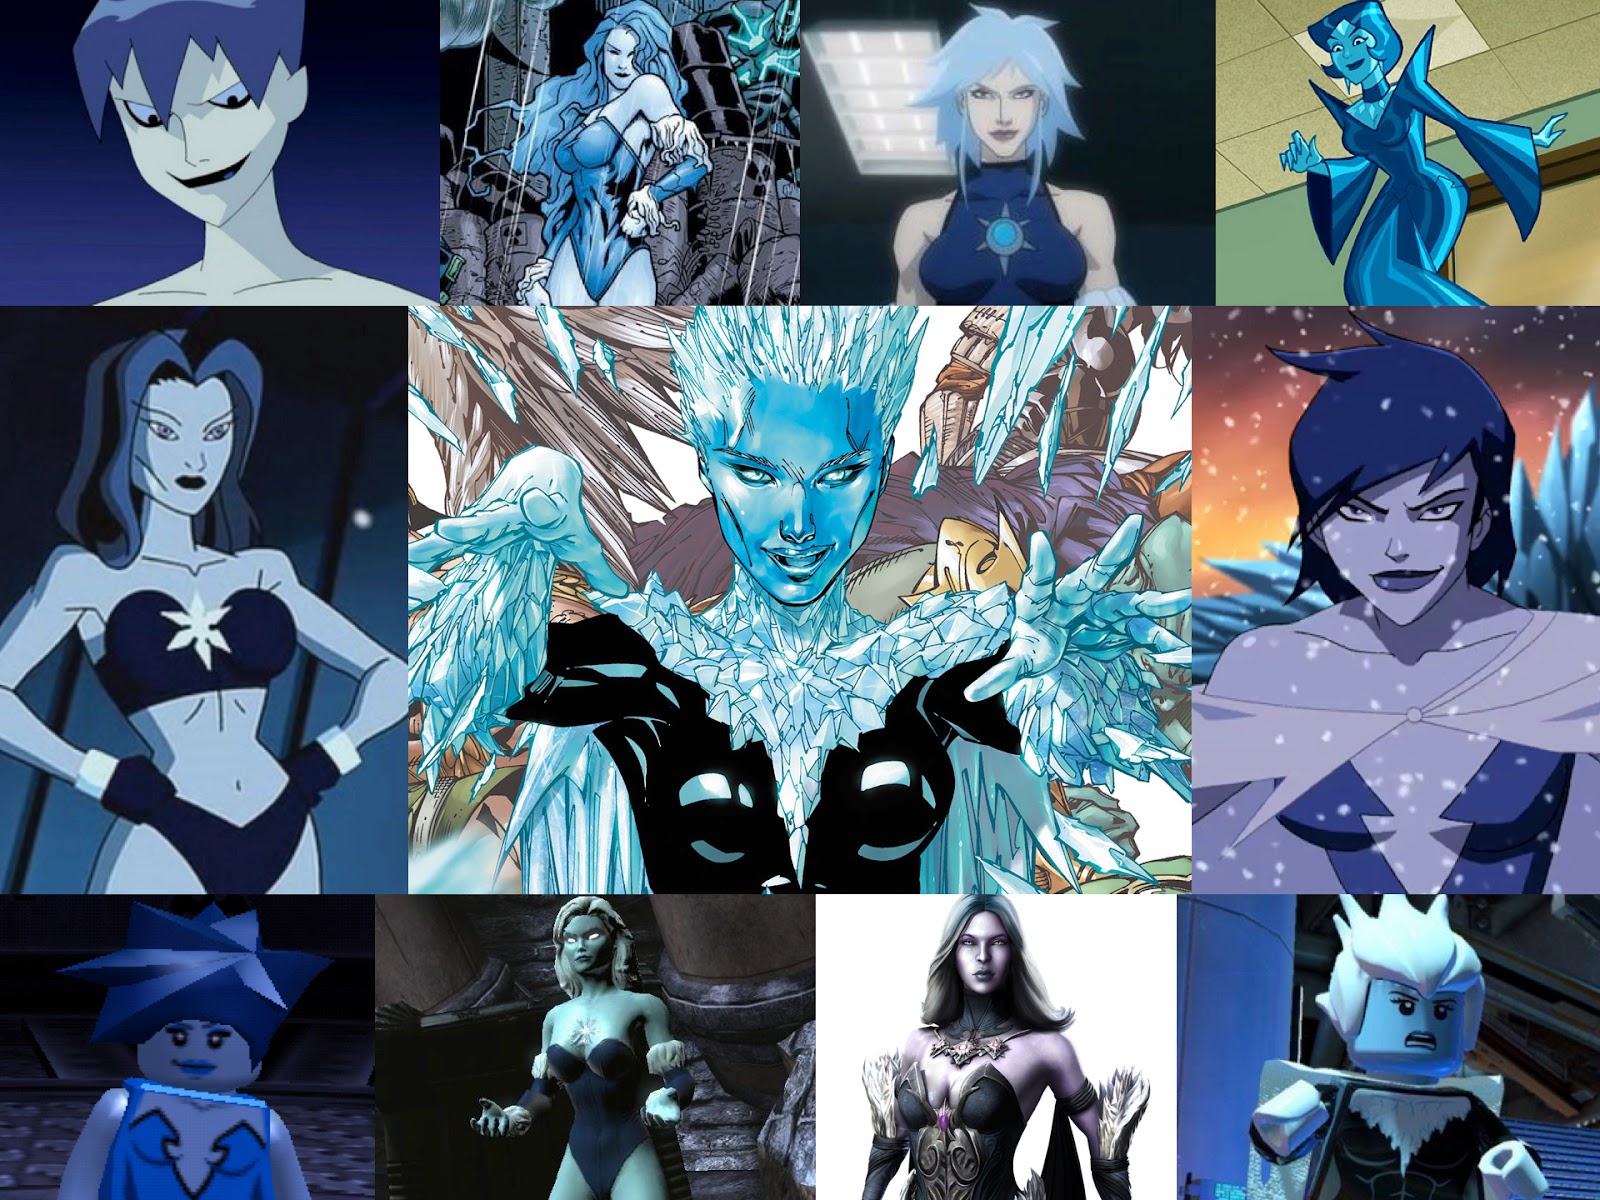 On Firestorm's end, I guess Killer Frost makes the most sense since sh...